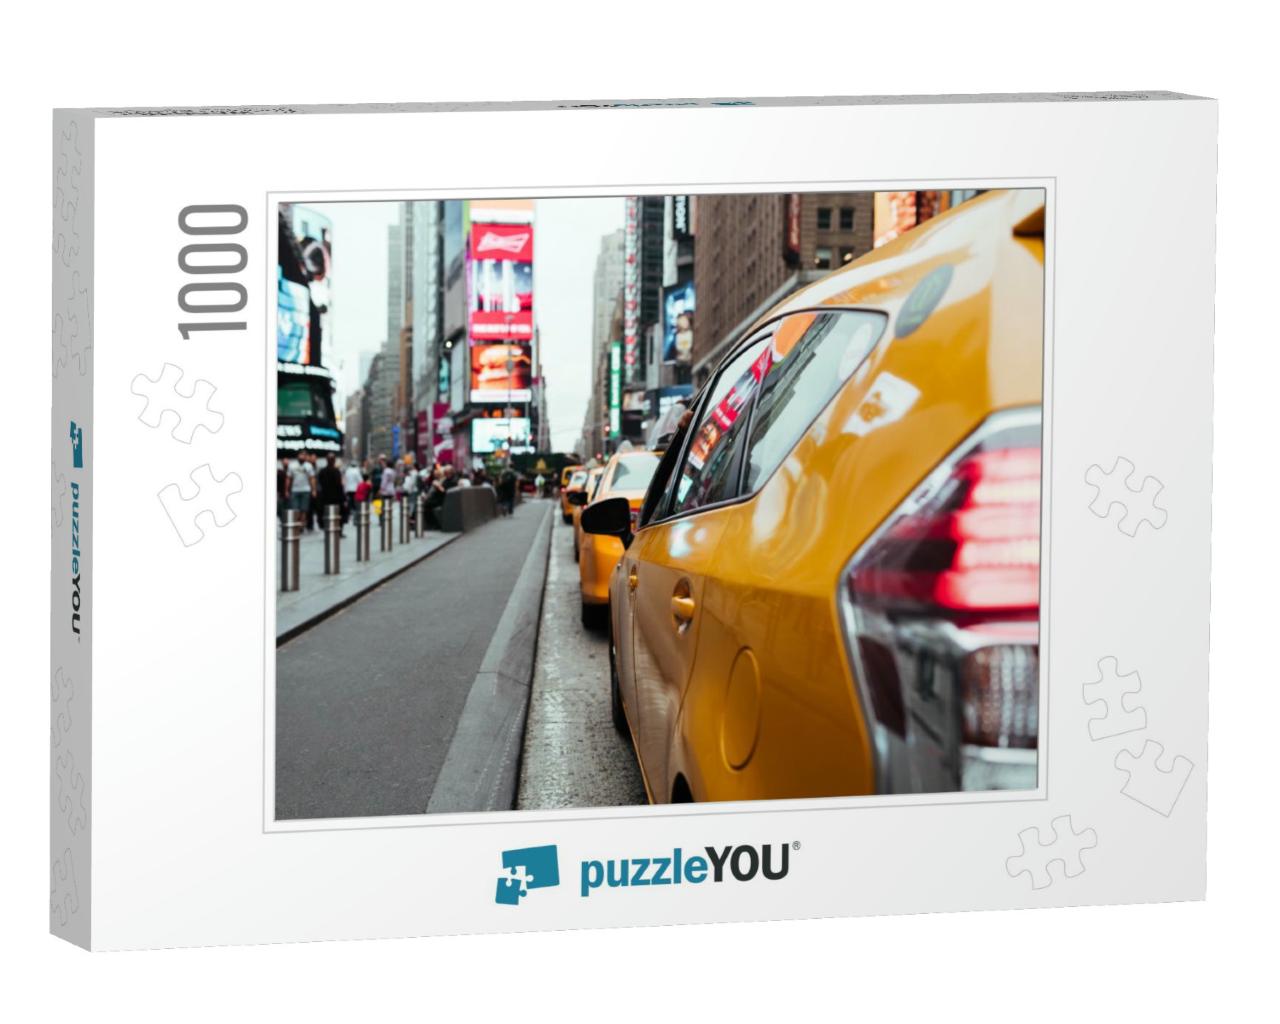 Taxi Cabs on Busy Time Square Road... Jigsaw Puzzle with 1000 pieces